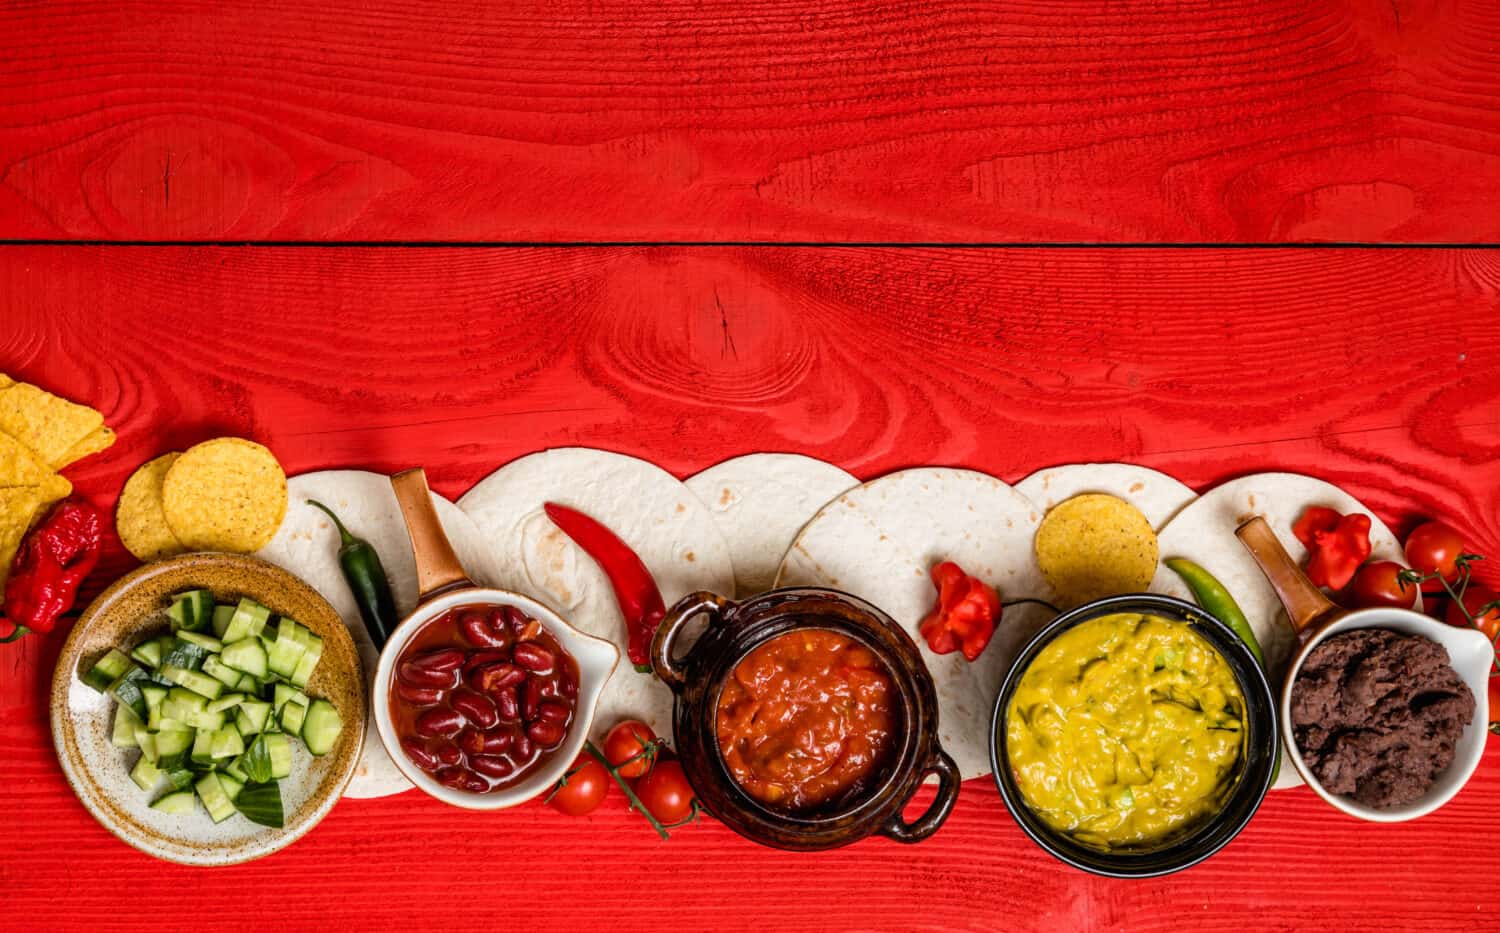 Mexican food concept: tortilla chips, guacamole, salsa, chilli, refried black beans, and fresh ingredients over vintage red rustic wooden background. vegetarian. Top view